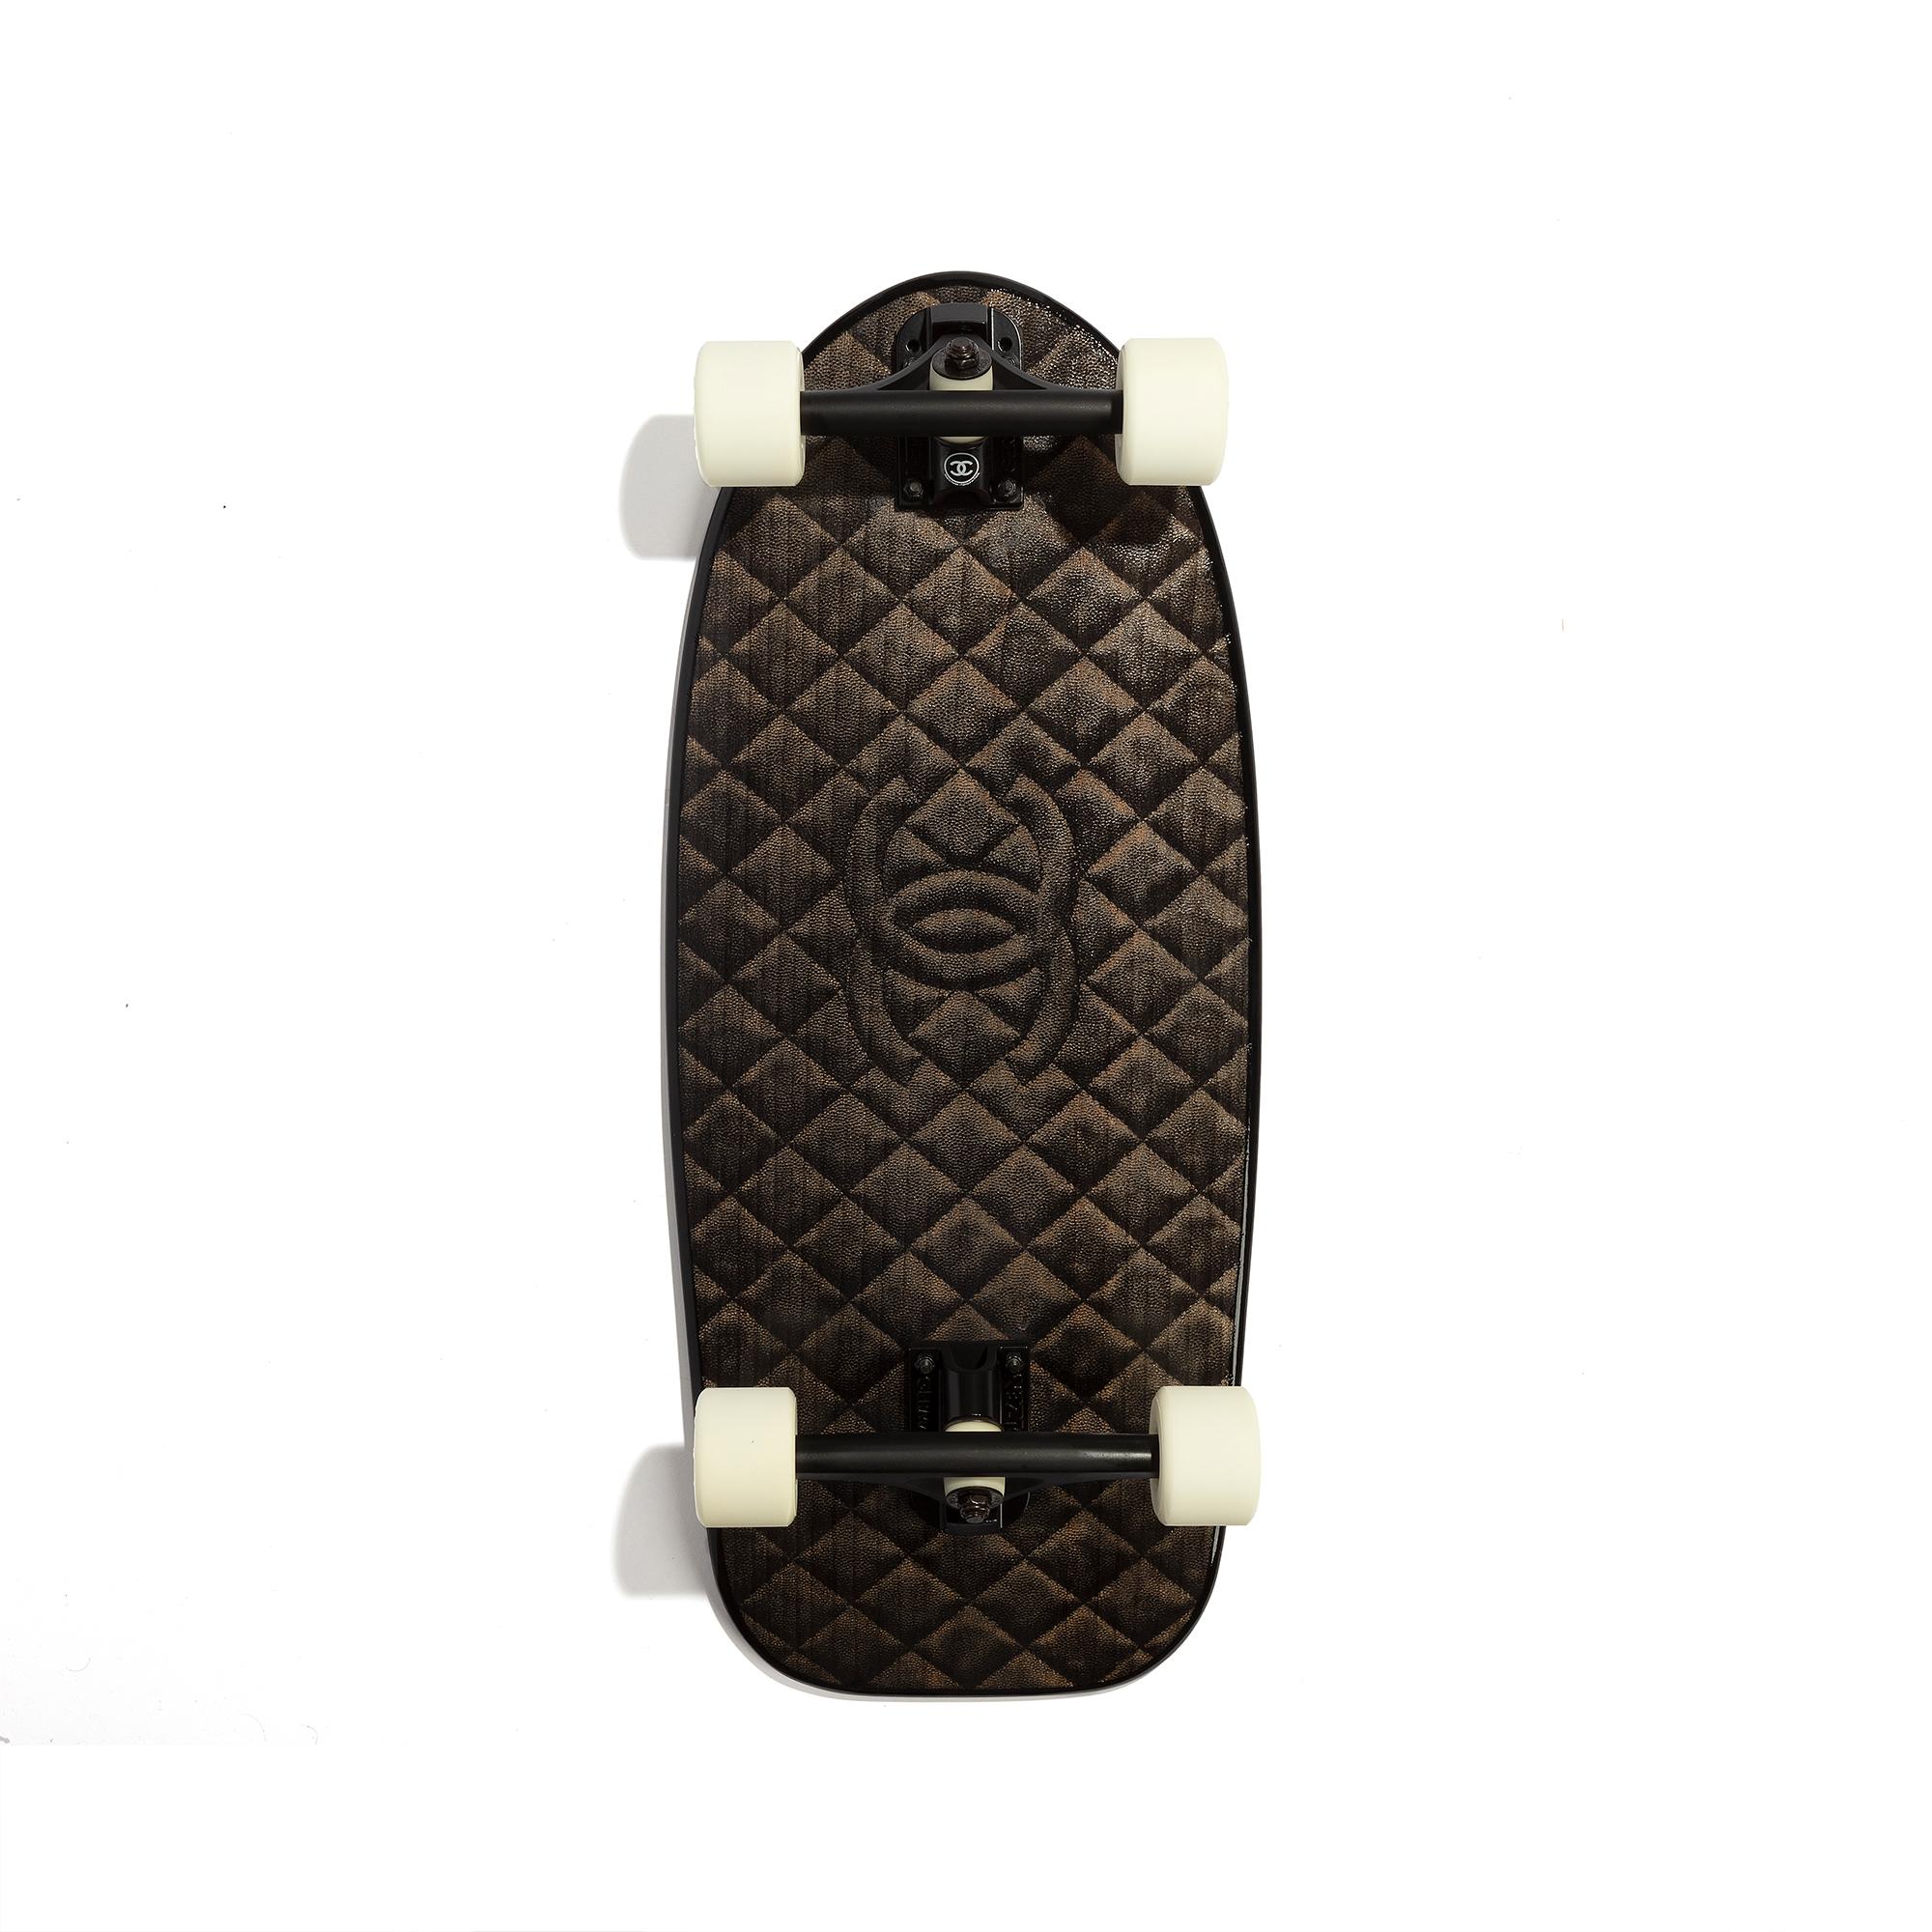 The Limited Edition 2019 Skateboard is a one-of-a-kind piece that adds sophistication and precision to any collection or home decor. It is crafted with black lacquered wood, durable grip tape, and a striking interlocking CC logo. The bottom of the